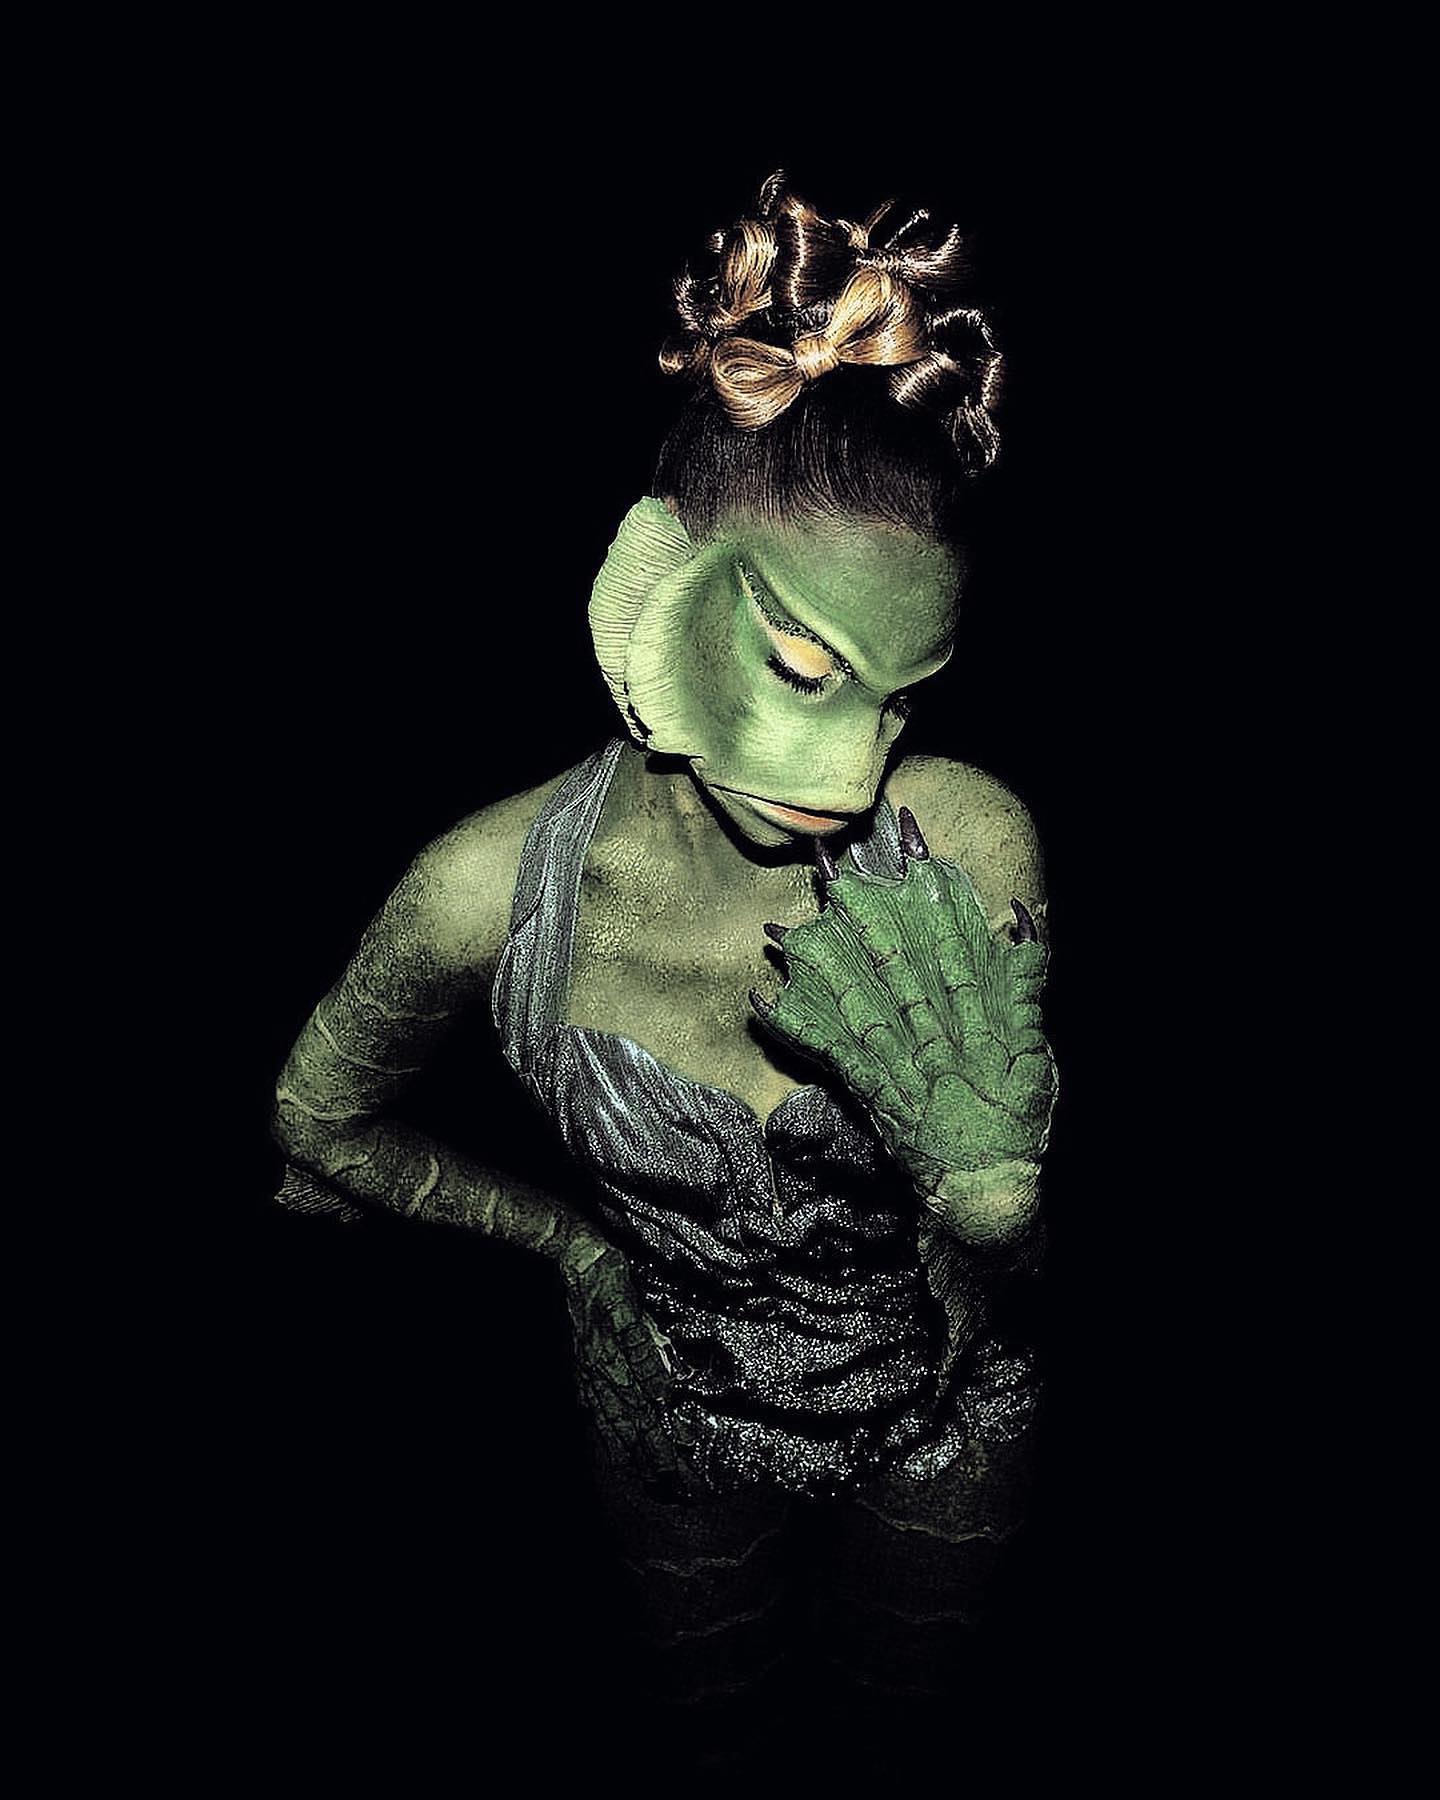 Ariana Grande Miss creature from the black lagoon cosplay